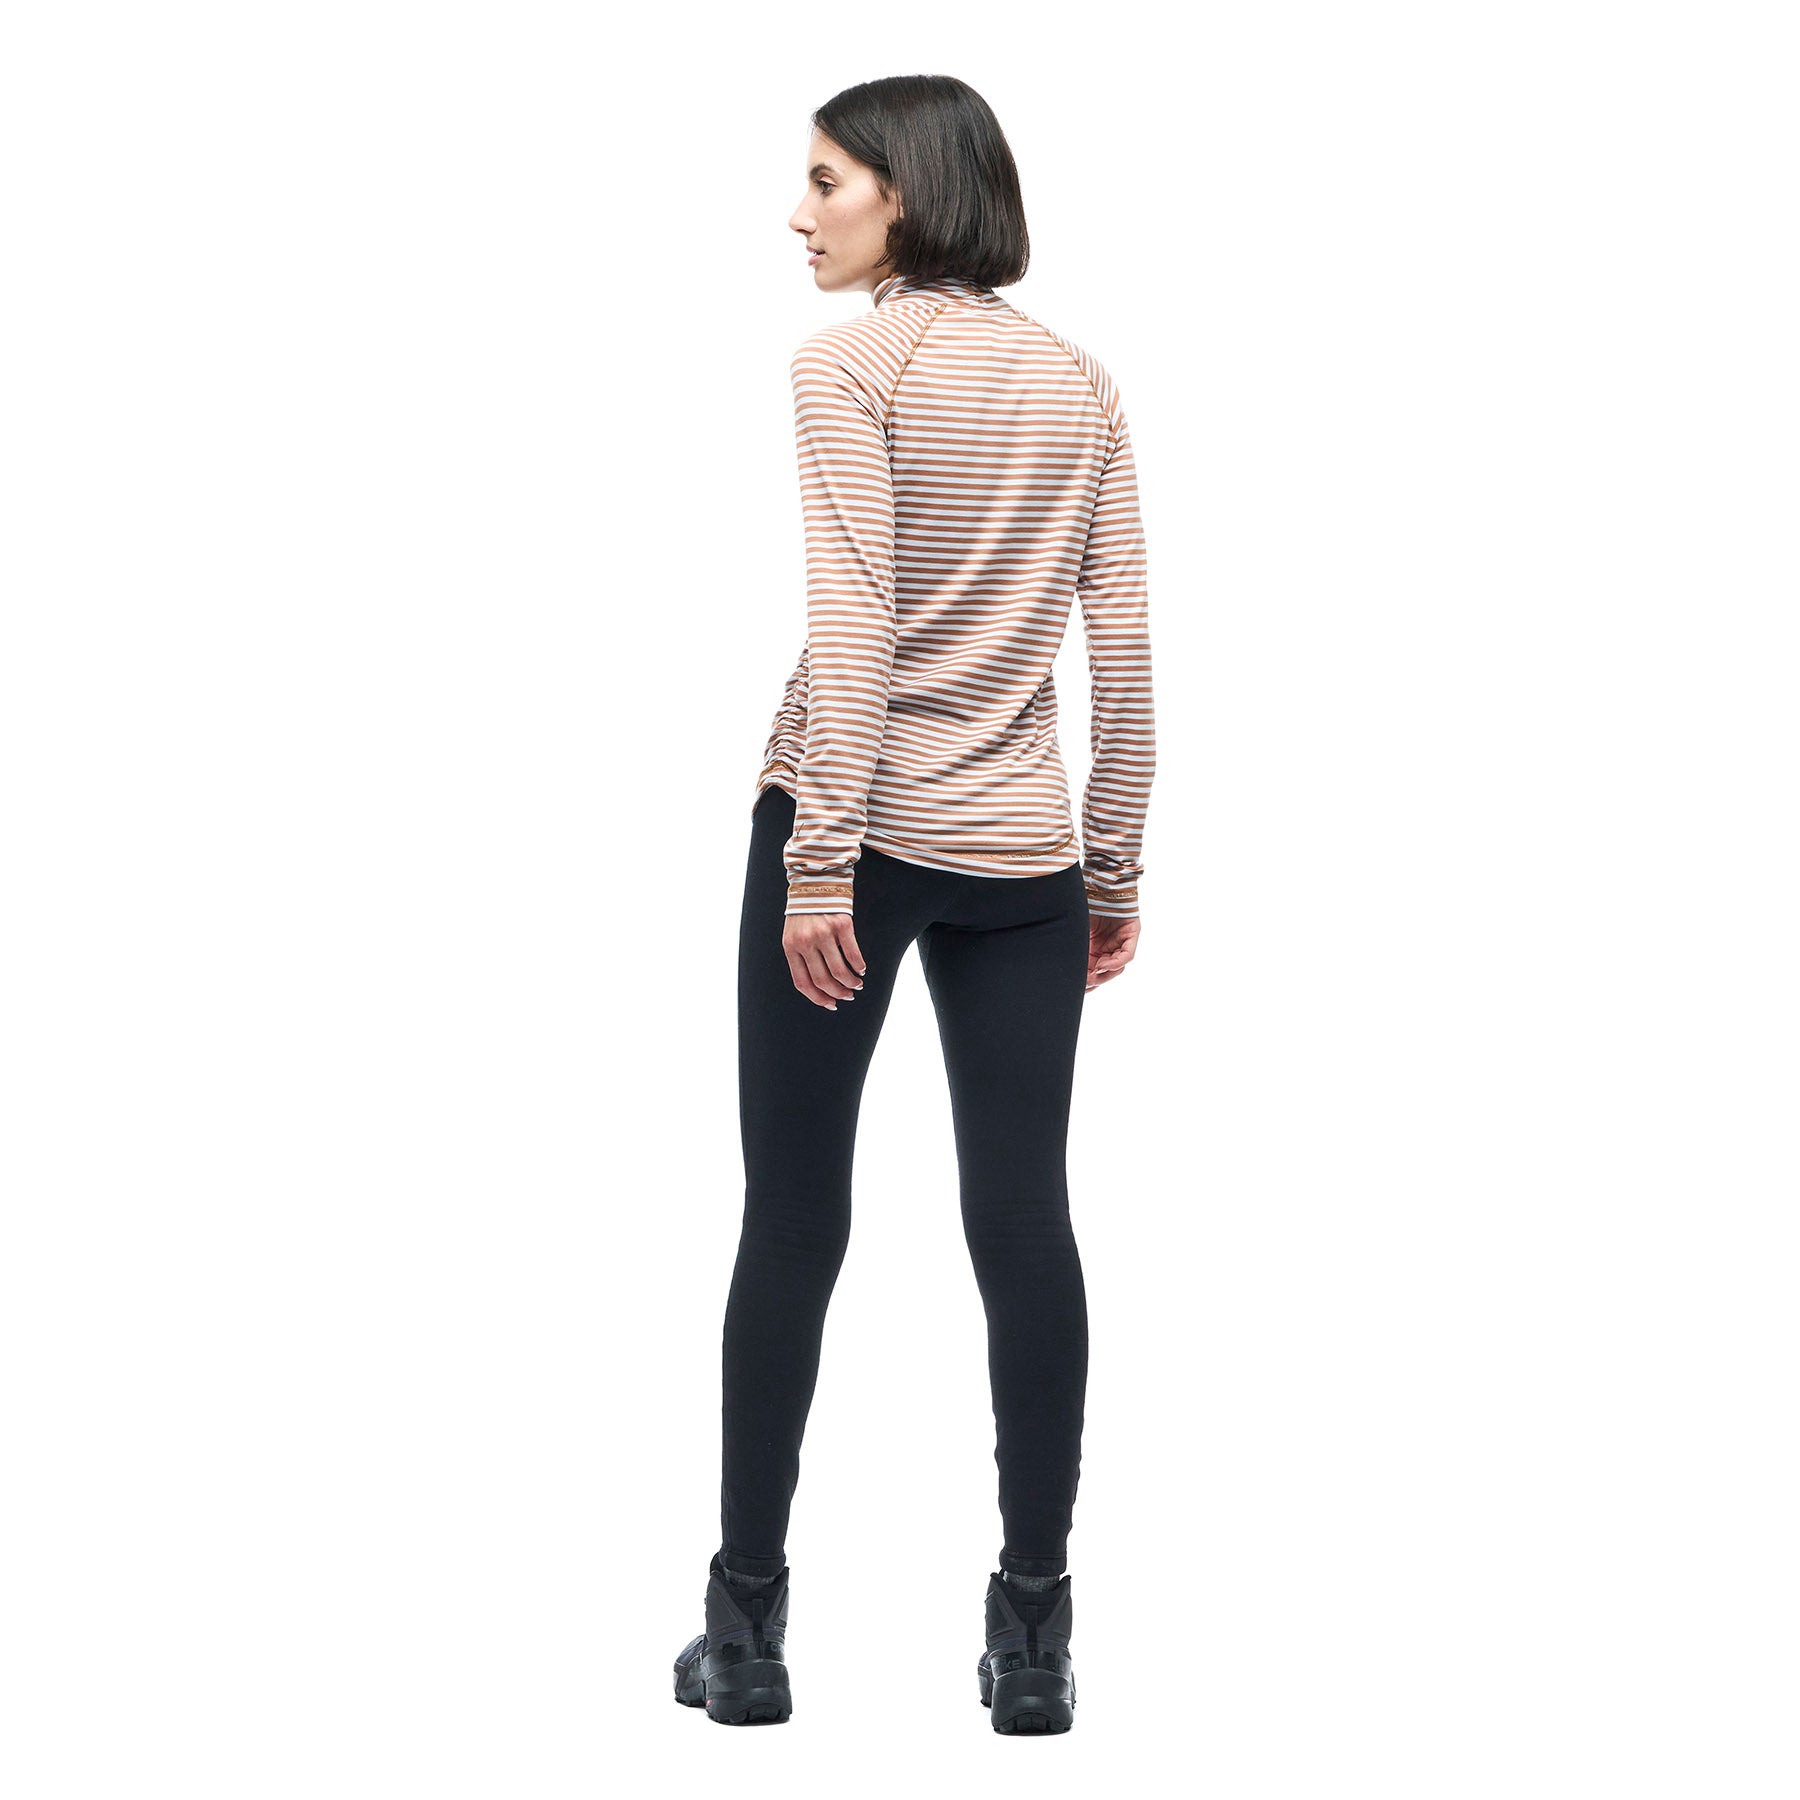 Image features a back facing model wearing the Indyeva Riga II long sleeve in white with red stripes and black leggings.